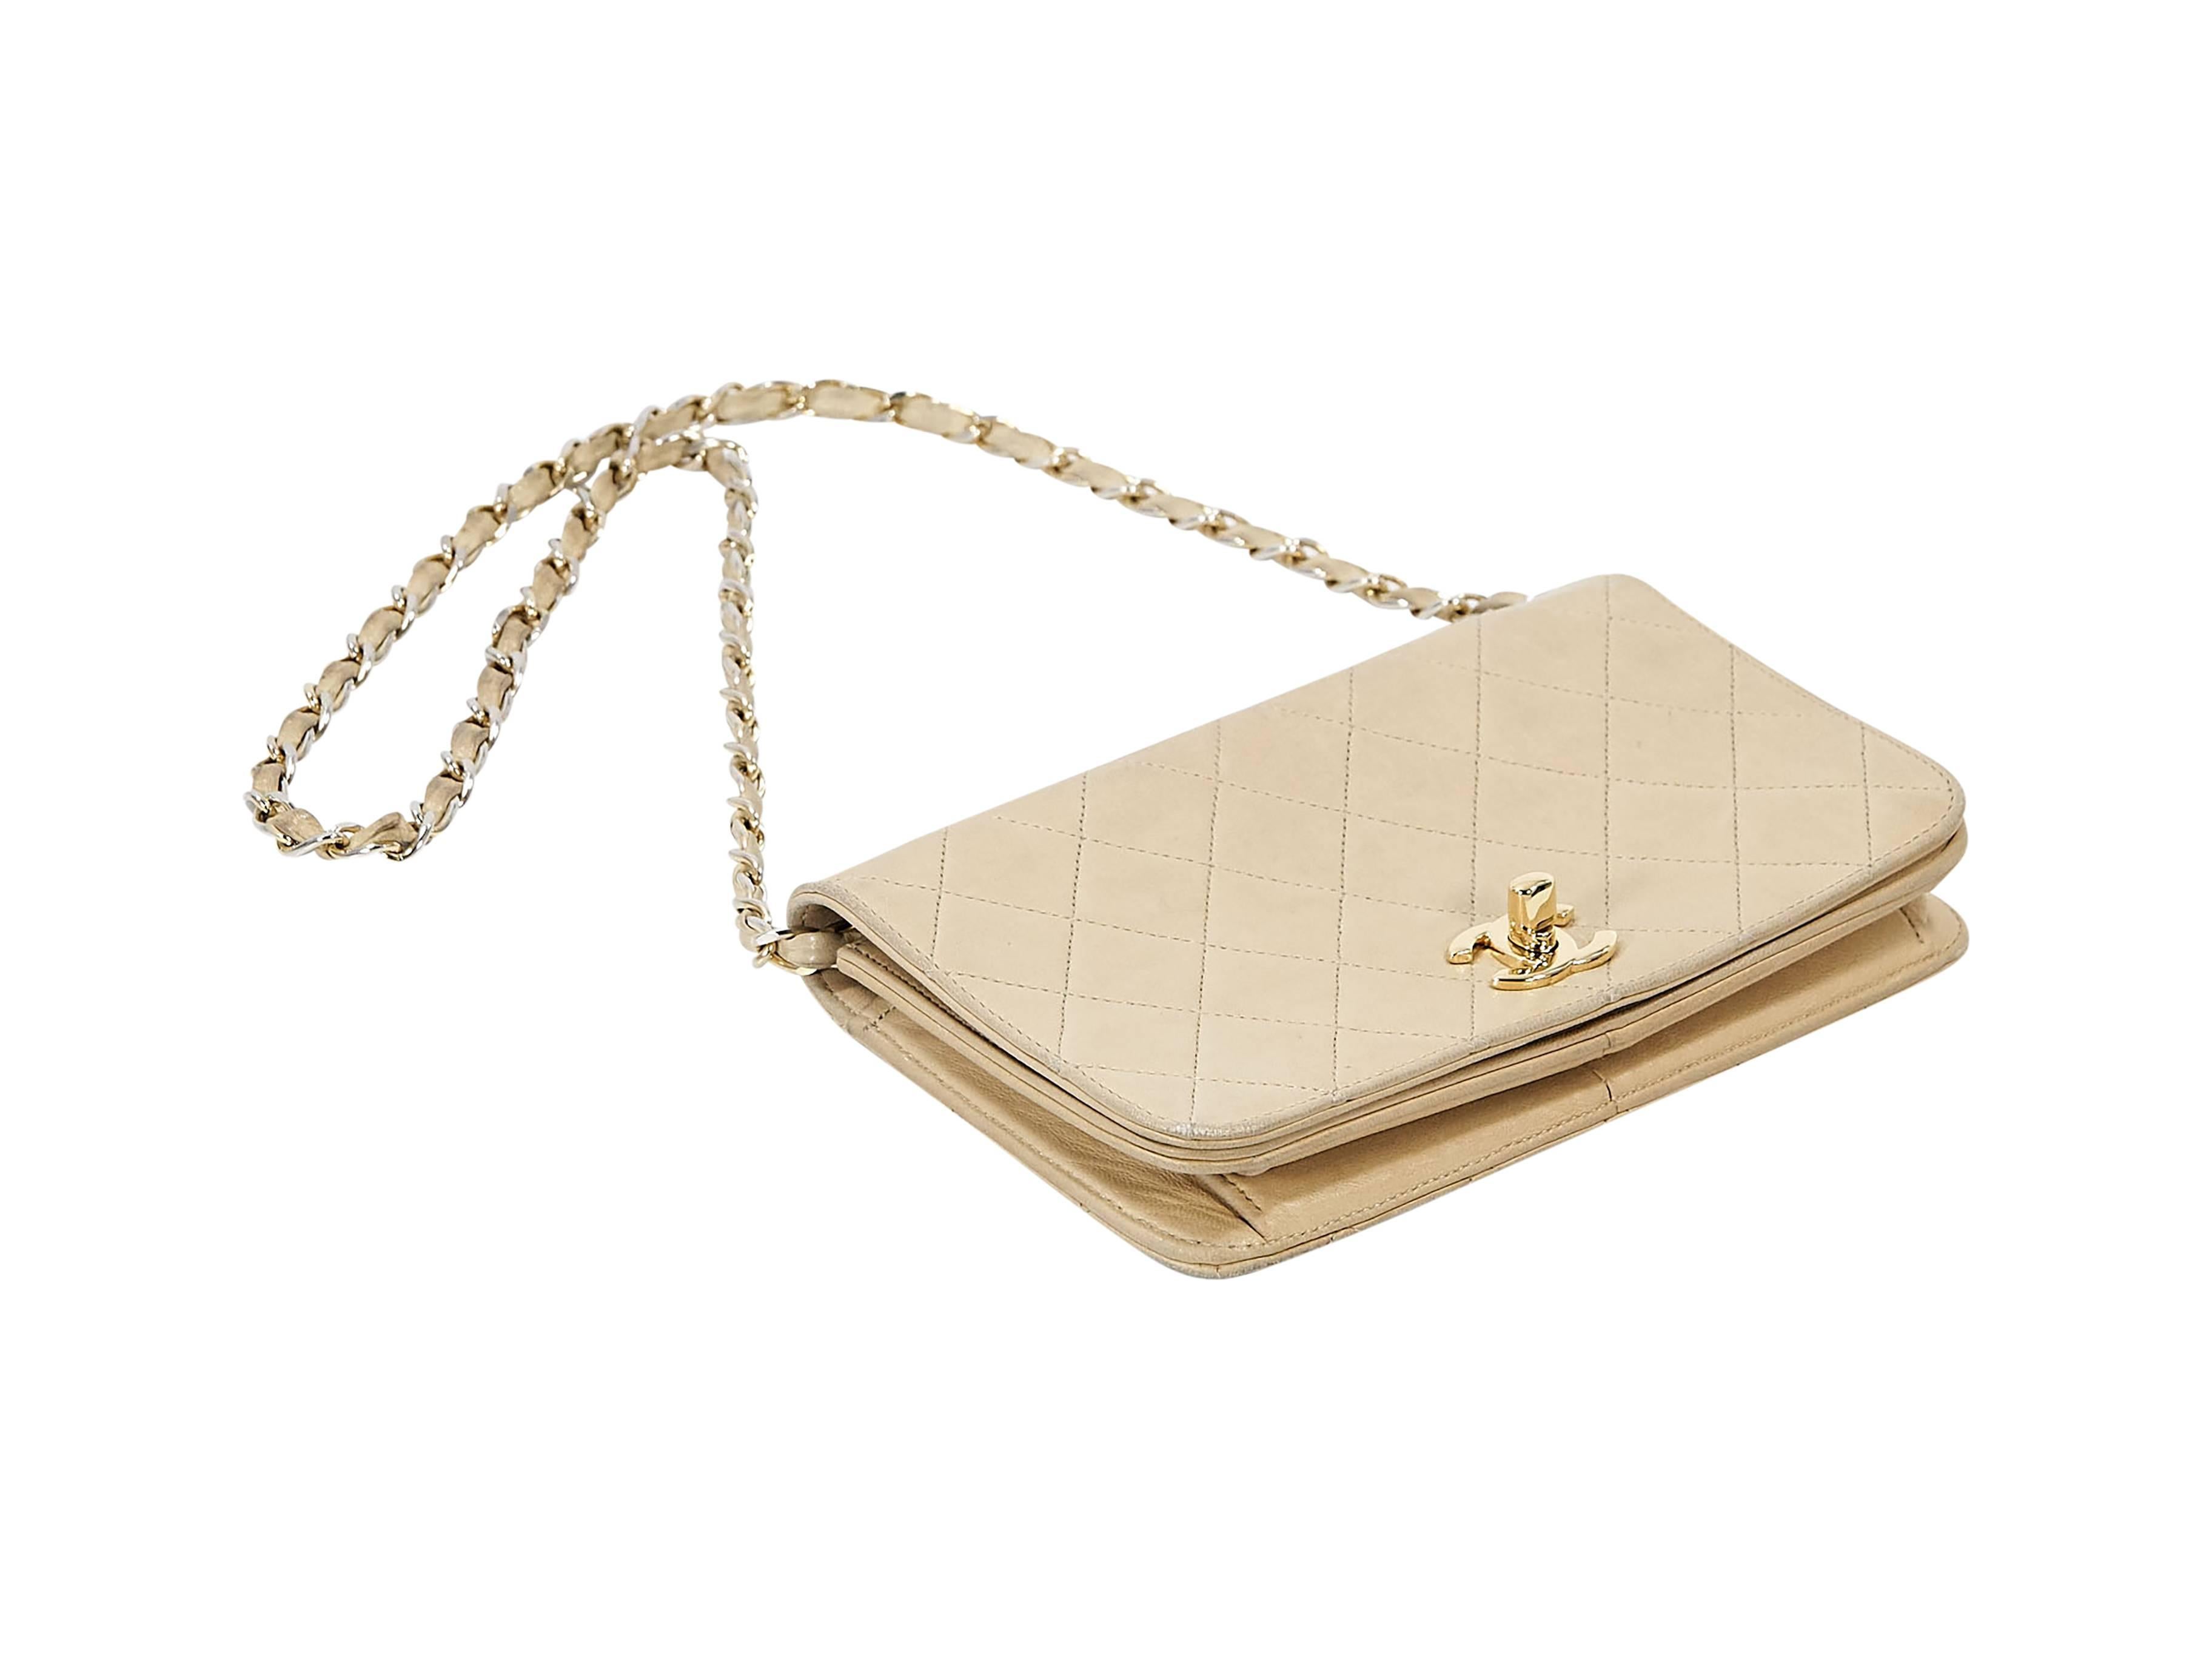 Product details: Tan quilted leather vintage crossbody bag by Chanel. Chain and leather crossbody strap. Front flap with twist-lock logo closure. Lined interior with inner slide pocket. Goldtone hardware. 8.5